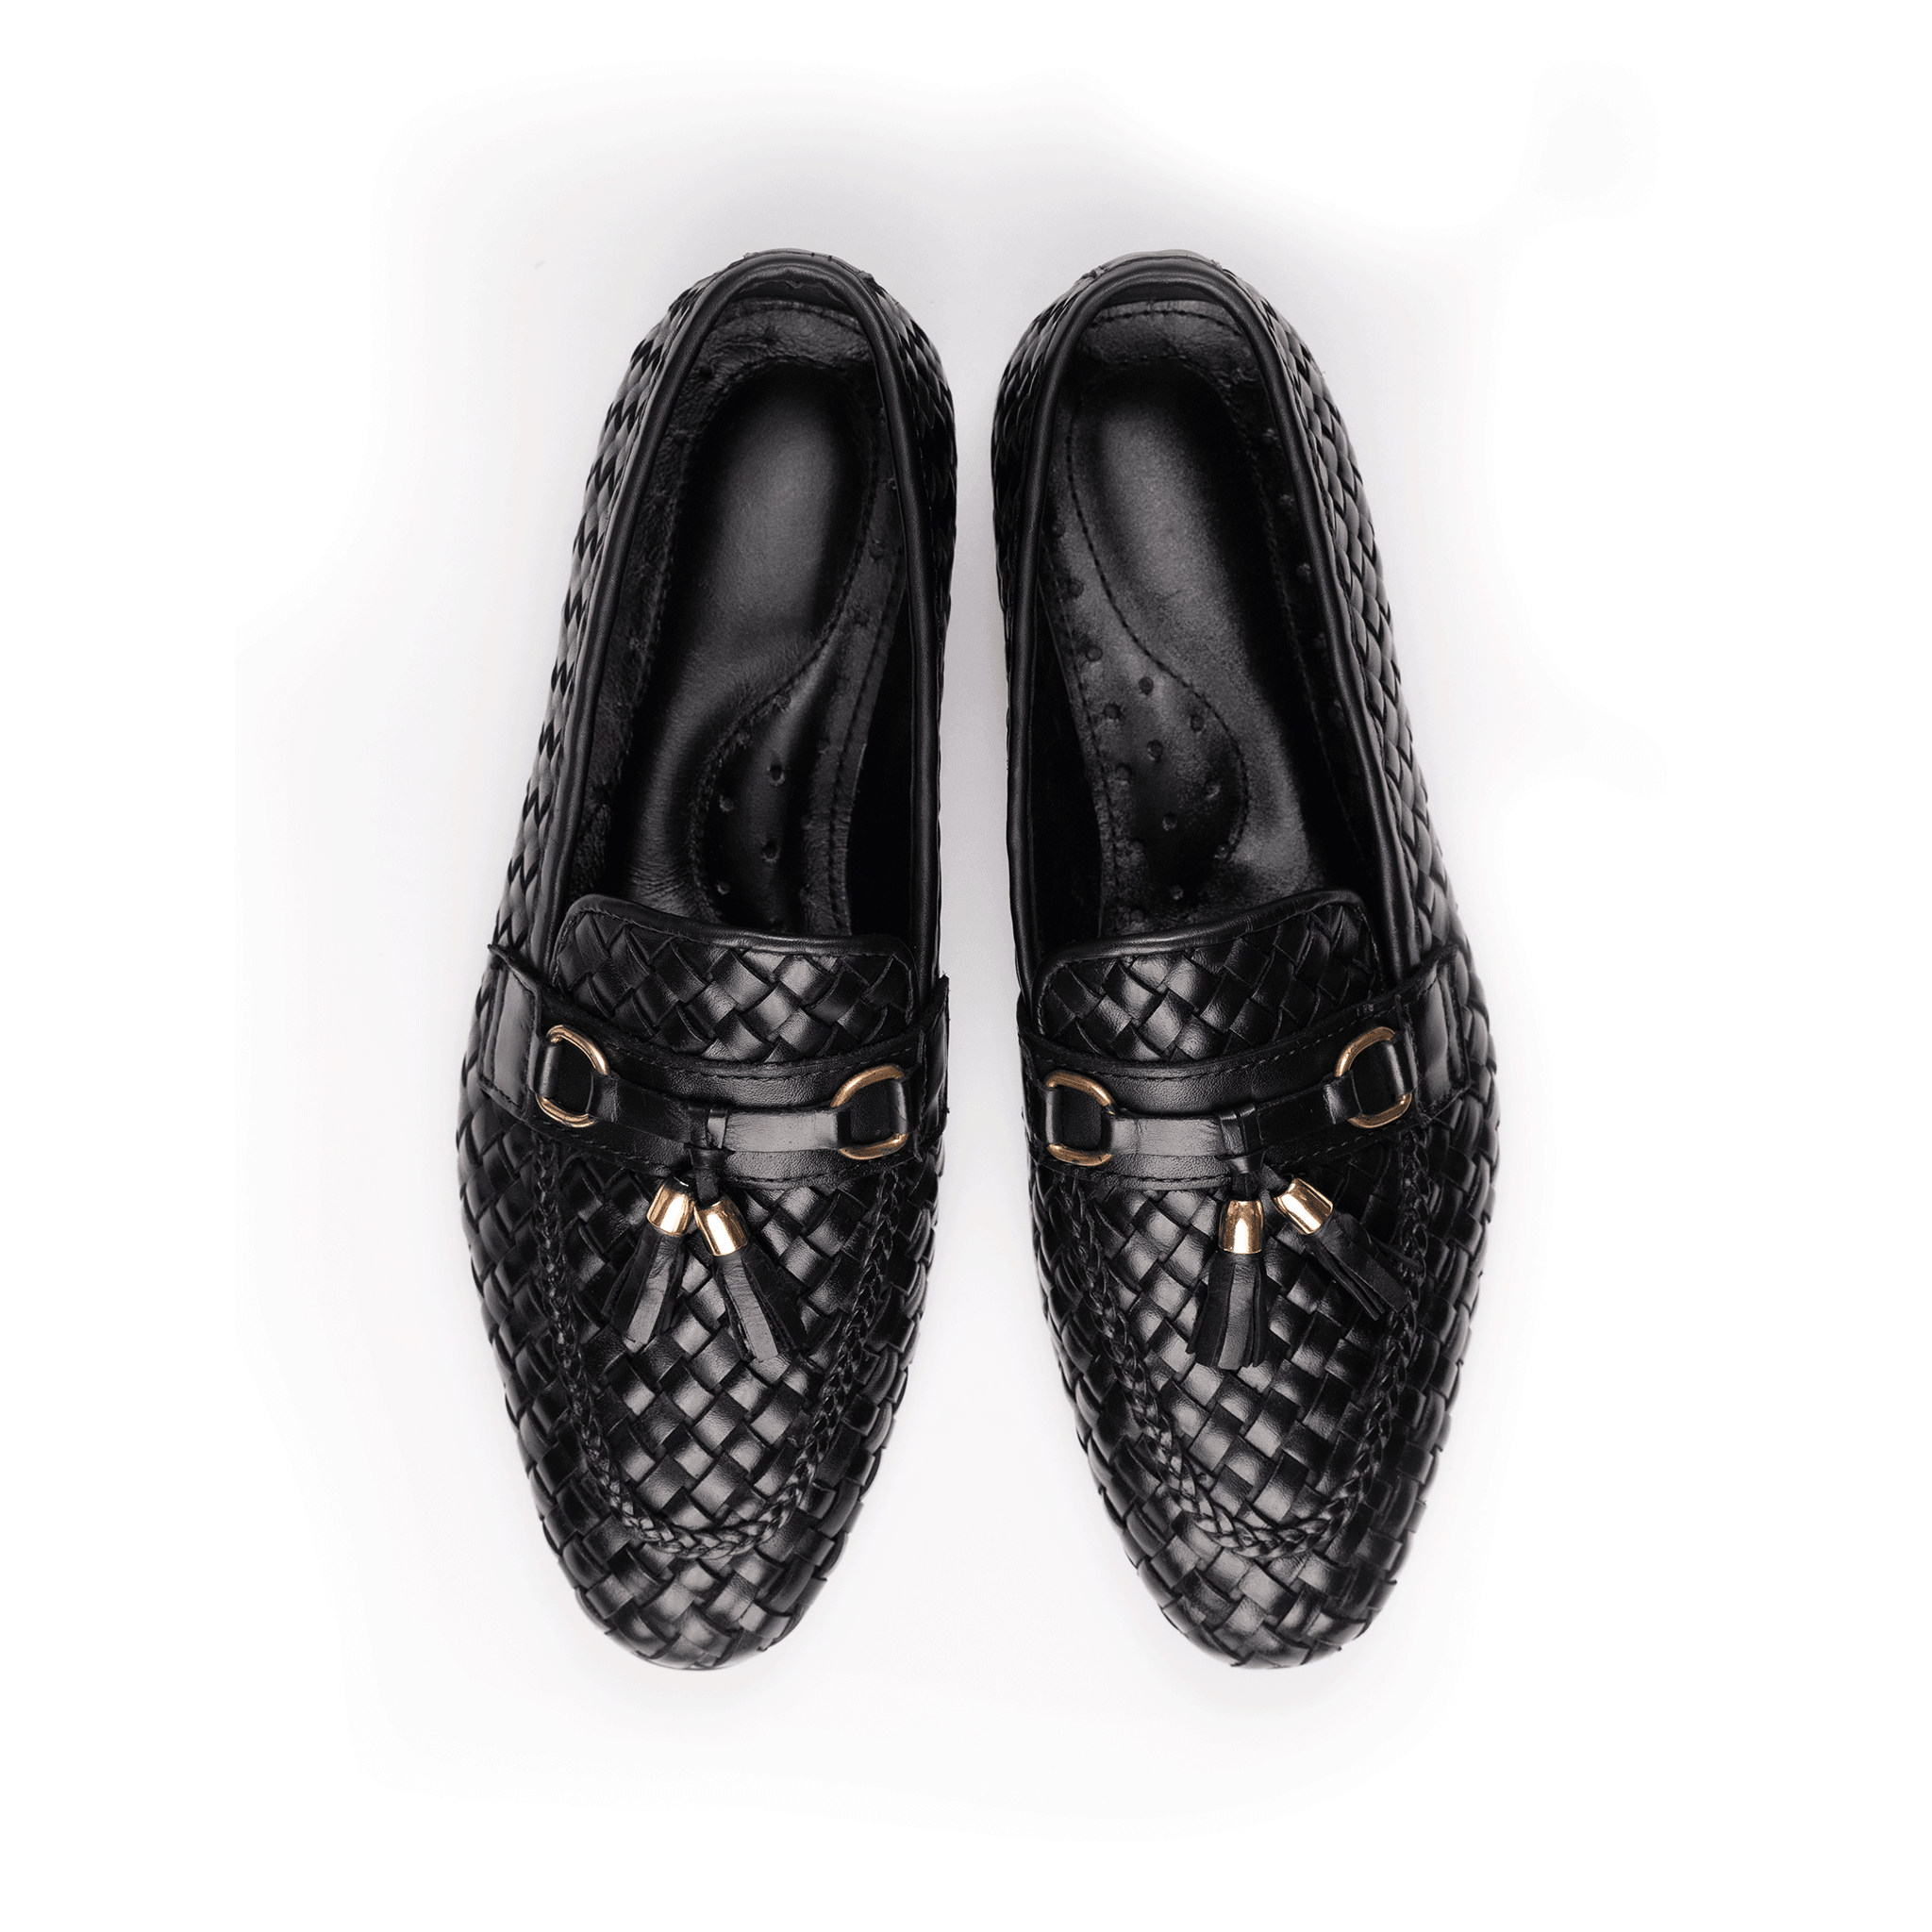 Softer Than Your Feet (STYF) Black Tassel Knitted Loafer With Buckle - Upstreet Co